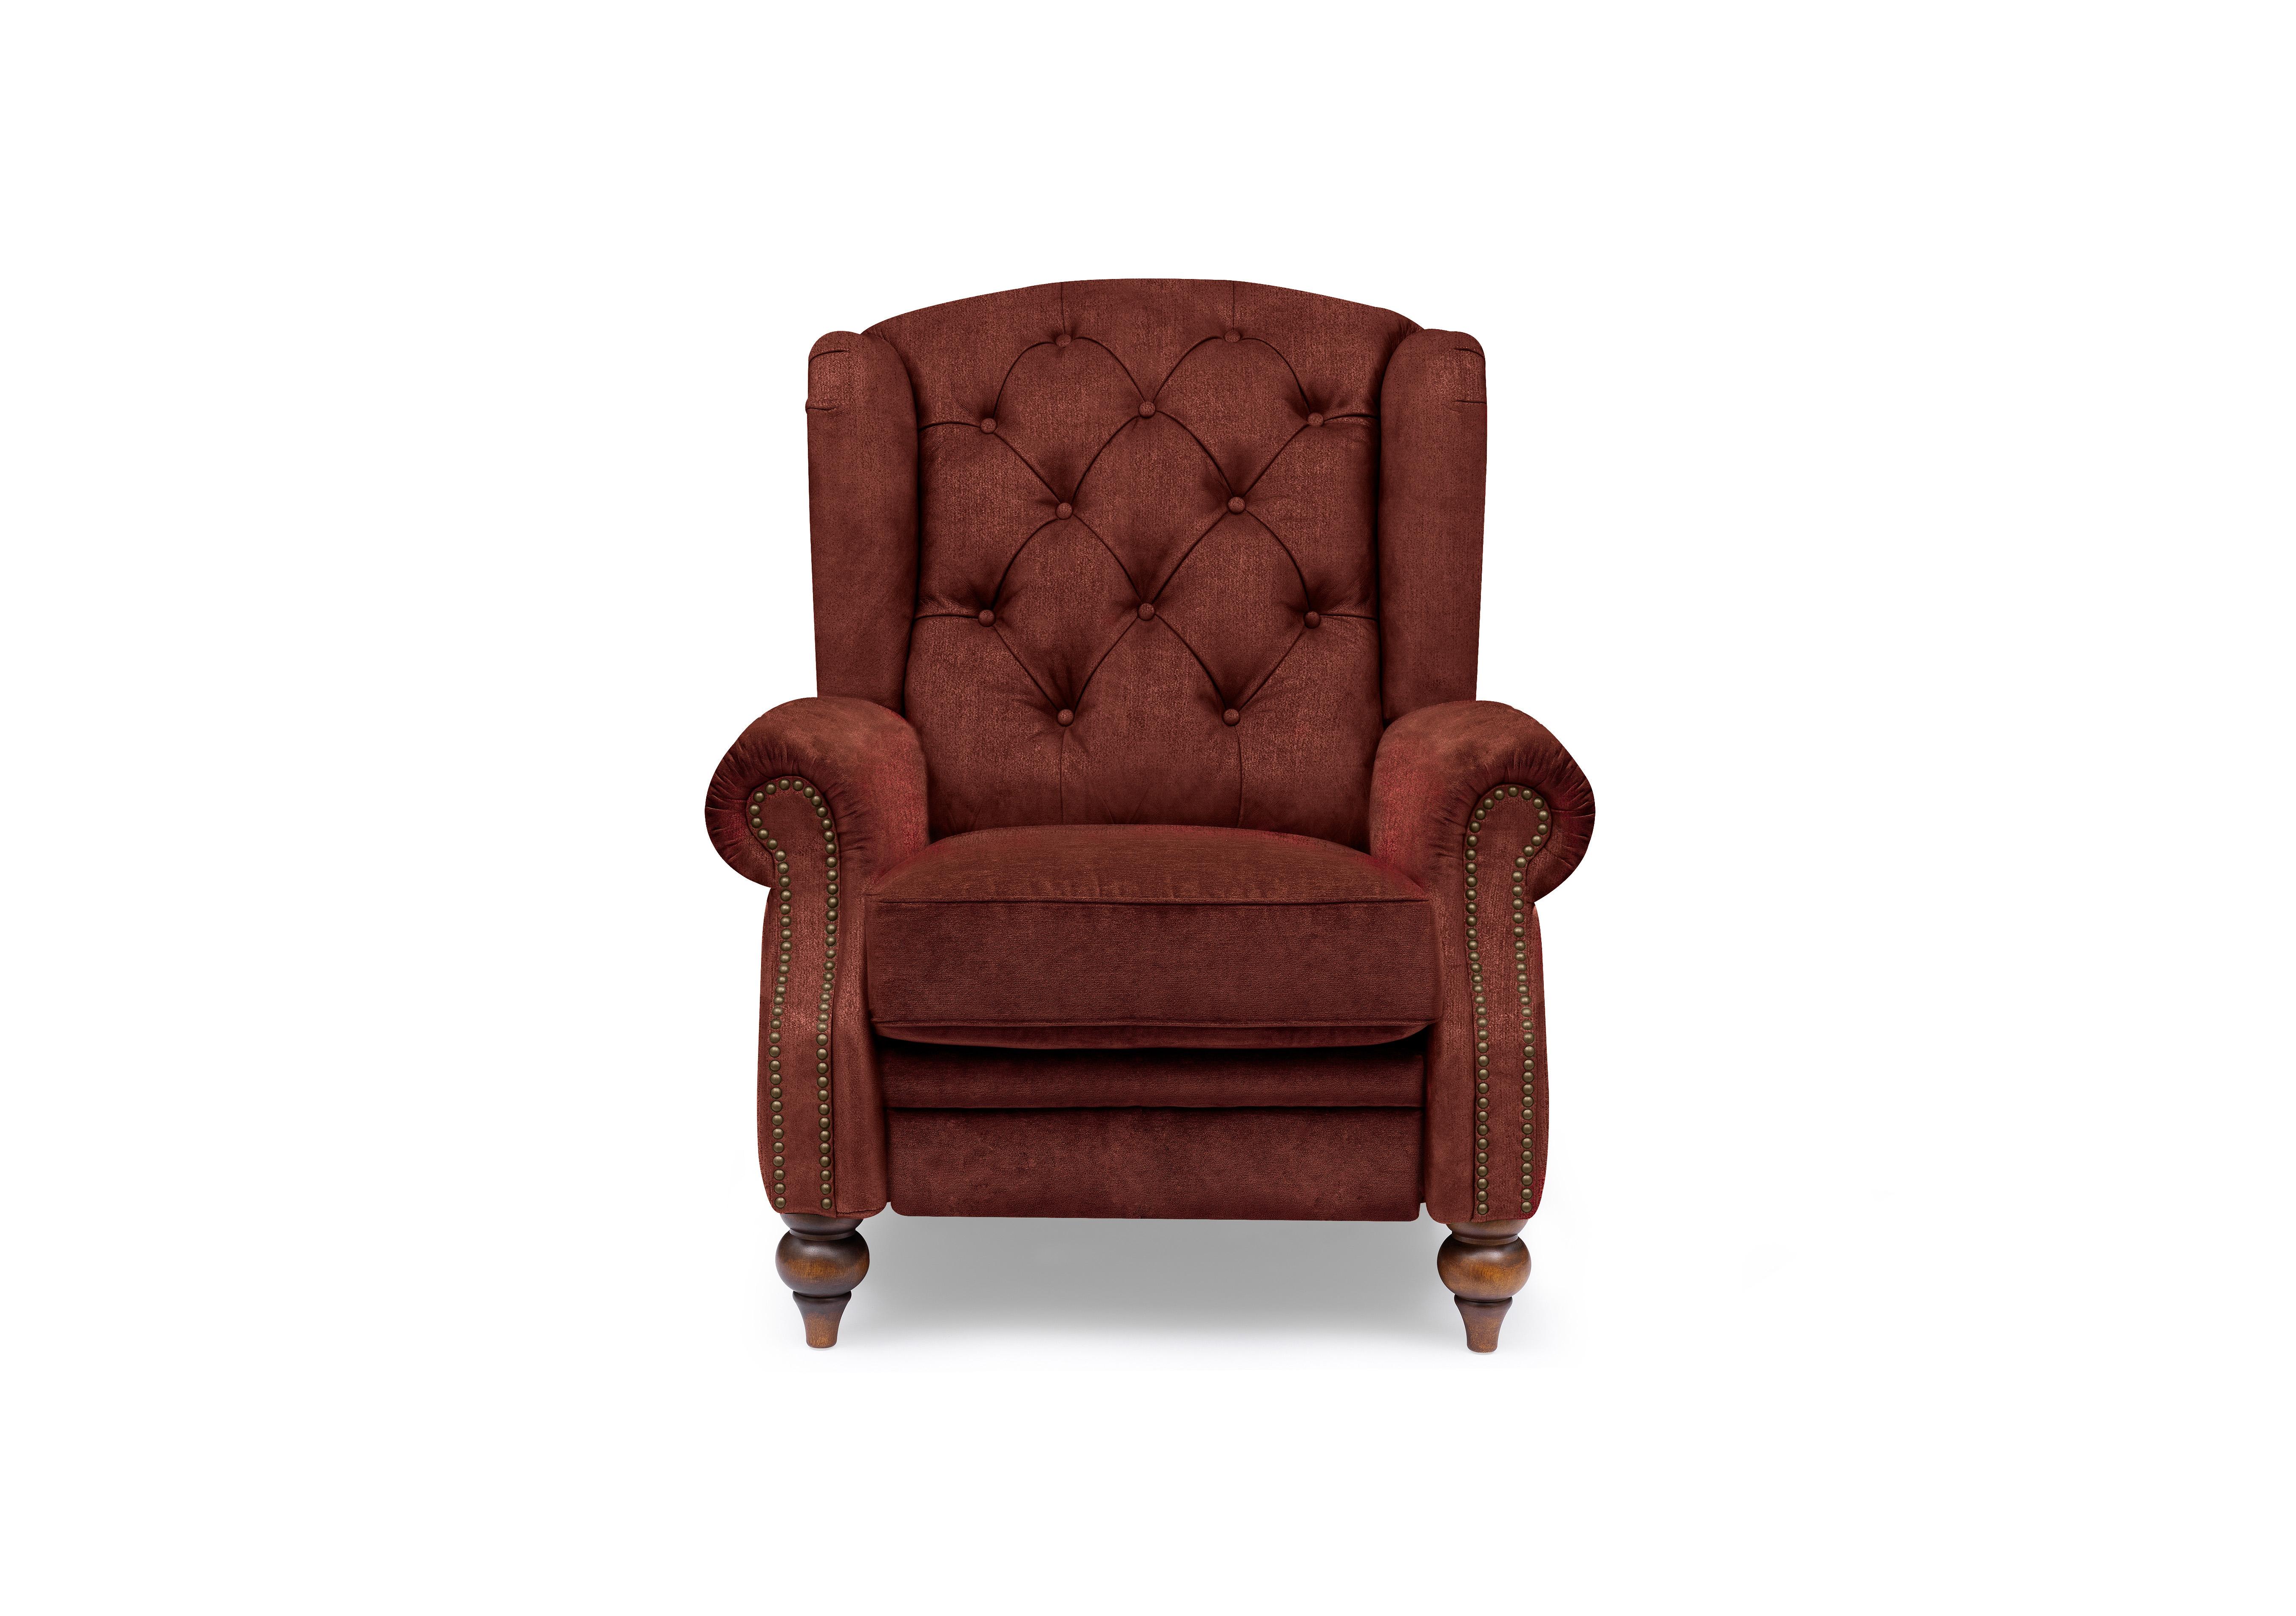 Shackleton Fabric Power Recliner Wing Chair in X3y1-W019 Tawny on Furniture Village